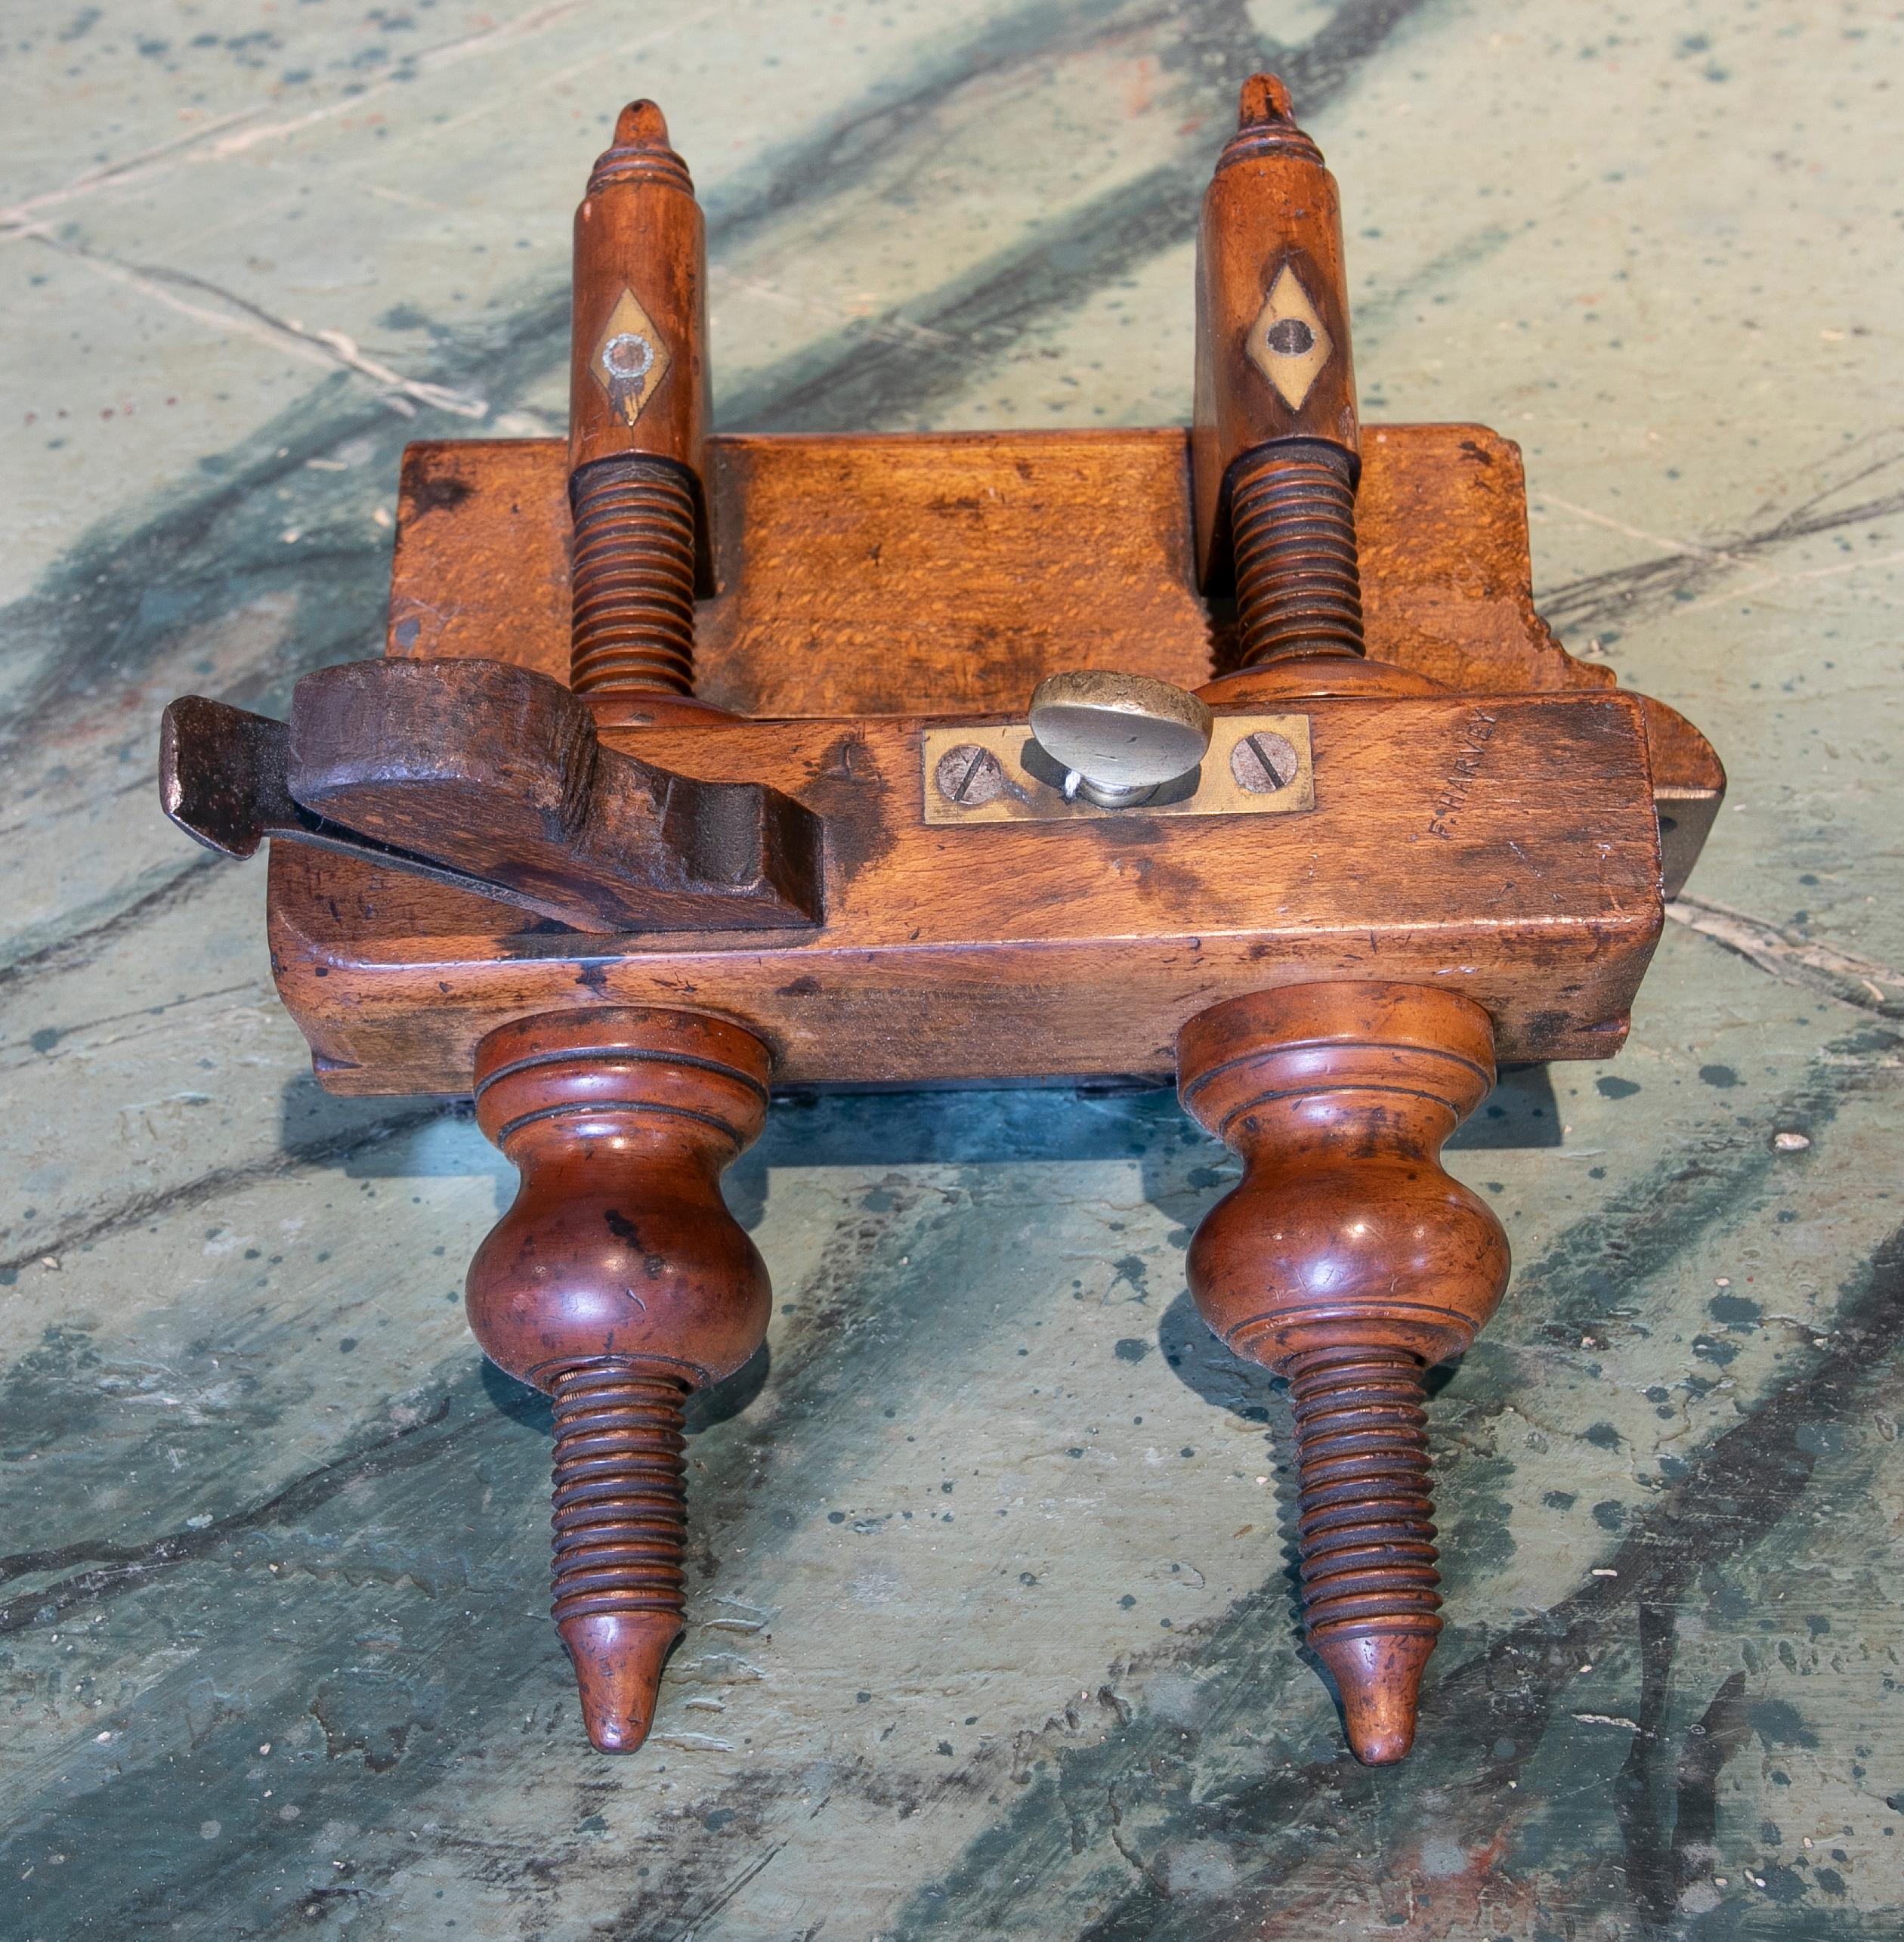 Rustic weathered 1970s Spanish walnut carpenter's tool with bronze fittings and inserts decorations.